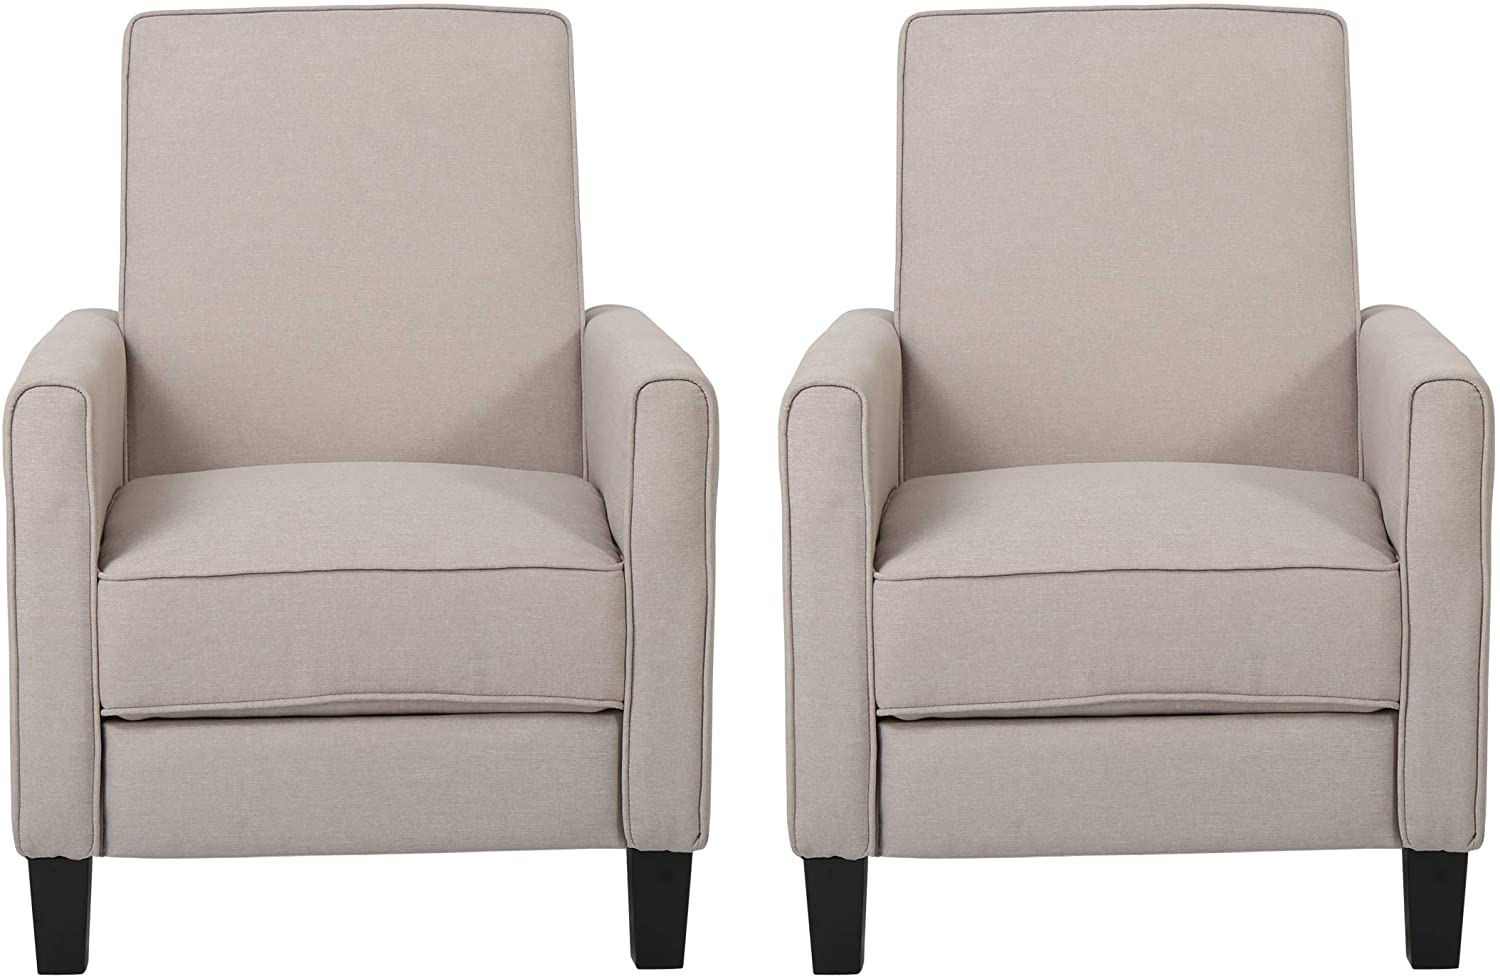 Emmie Fabric Recliner Set of 2